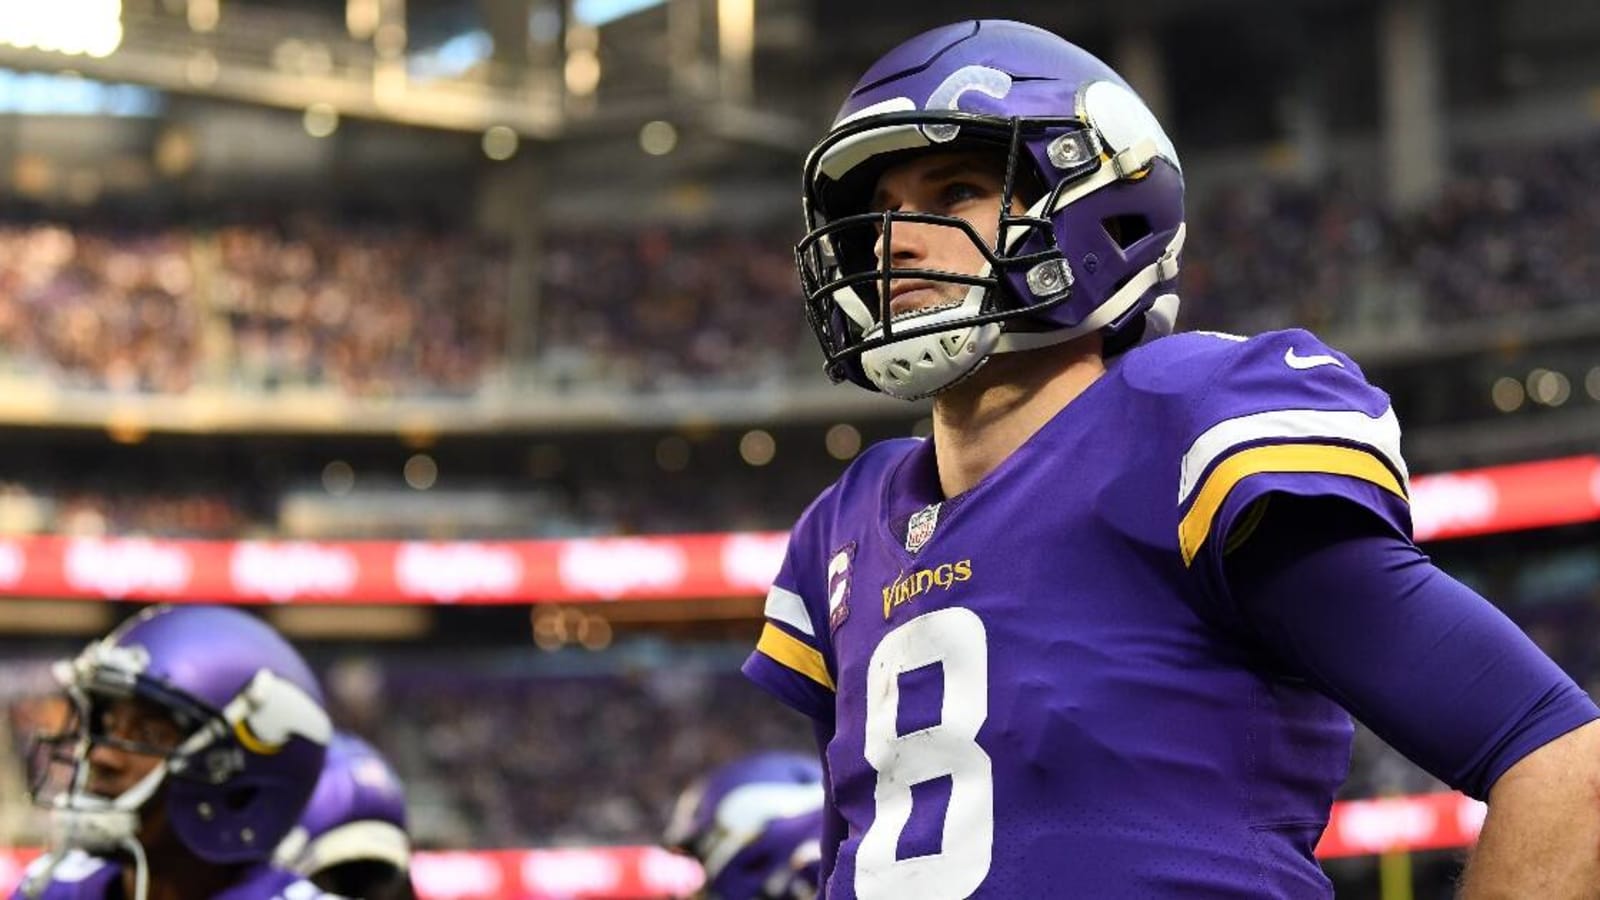 Vikings QB Kirk Cousins carted to locker room after suffering apparent ankle injury